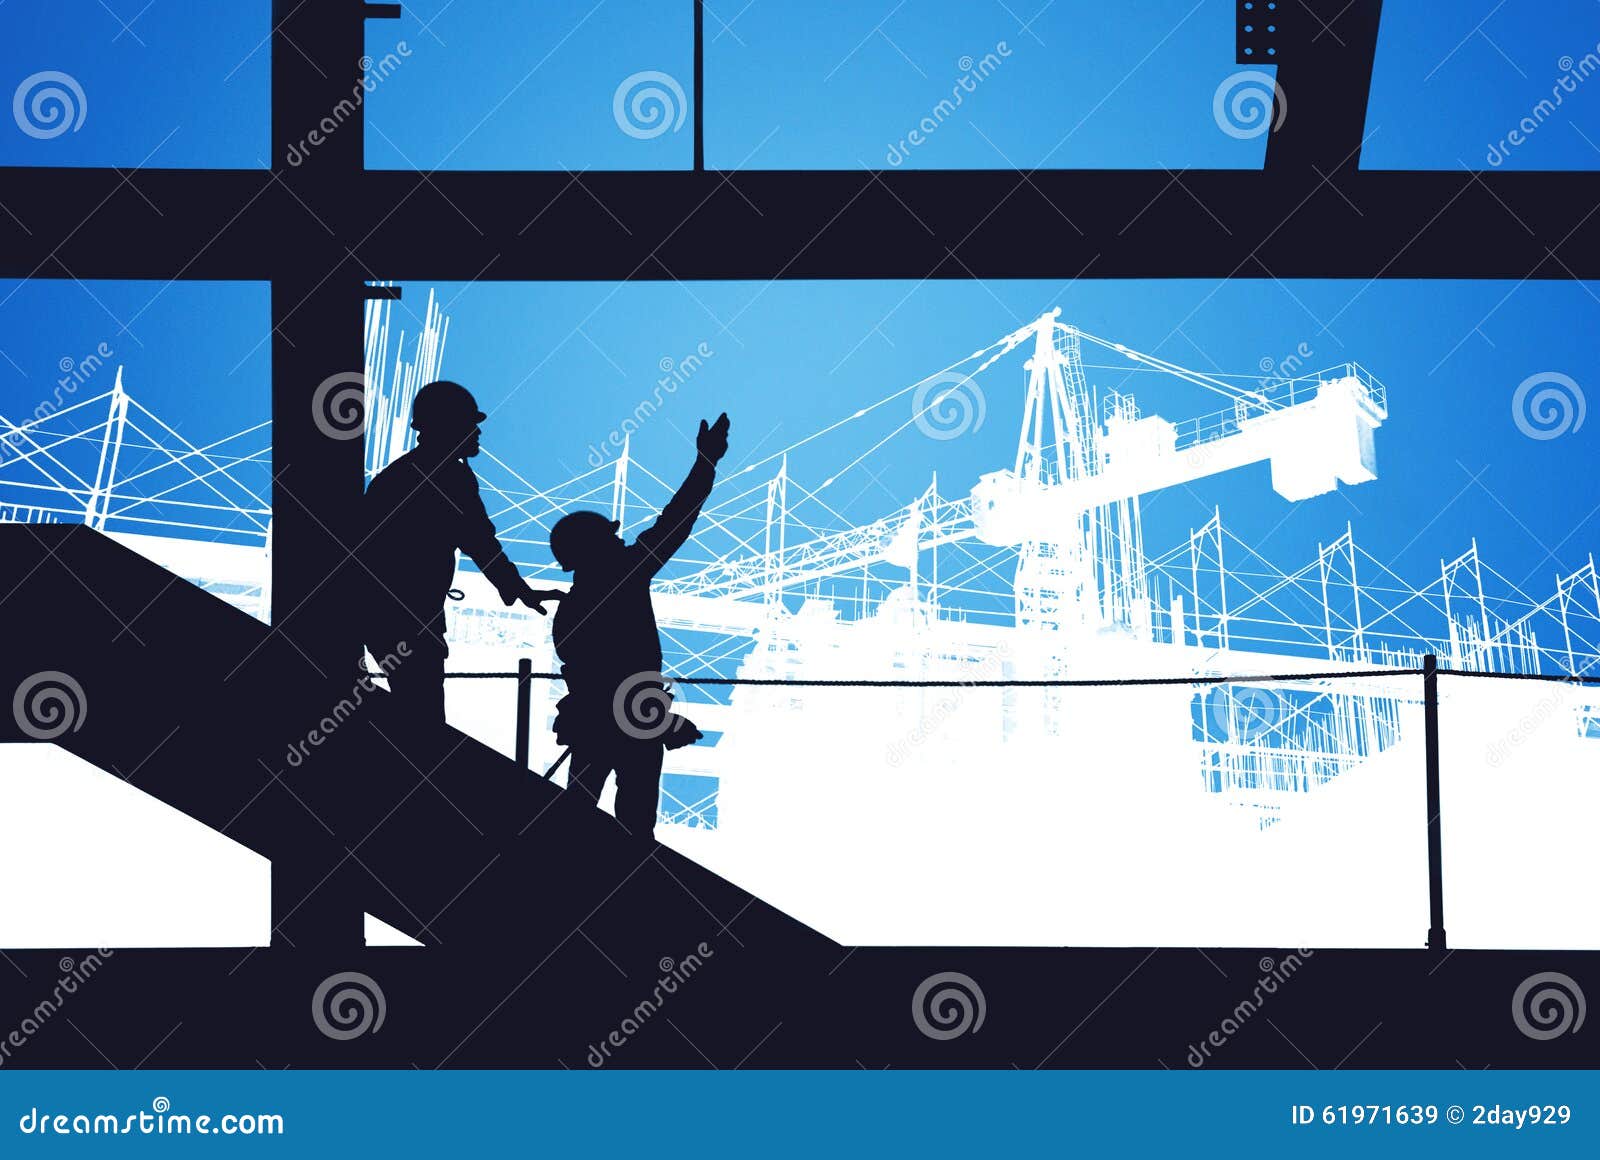 construction site silhouette people,  architecture, business